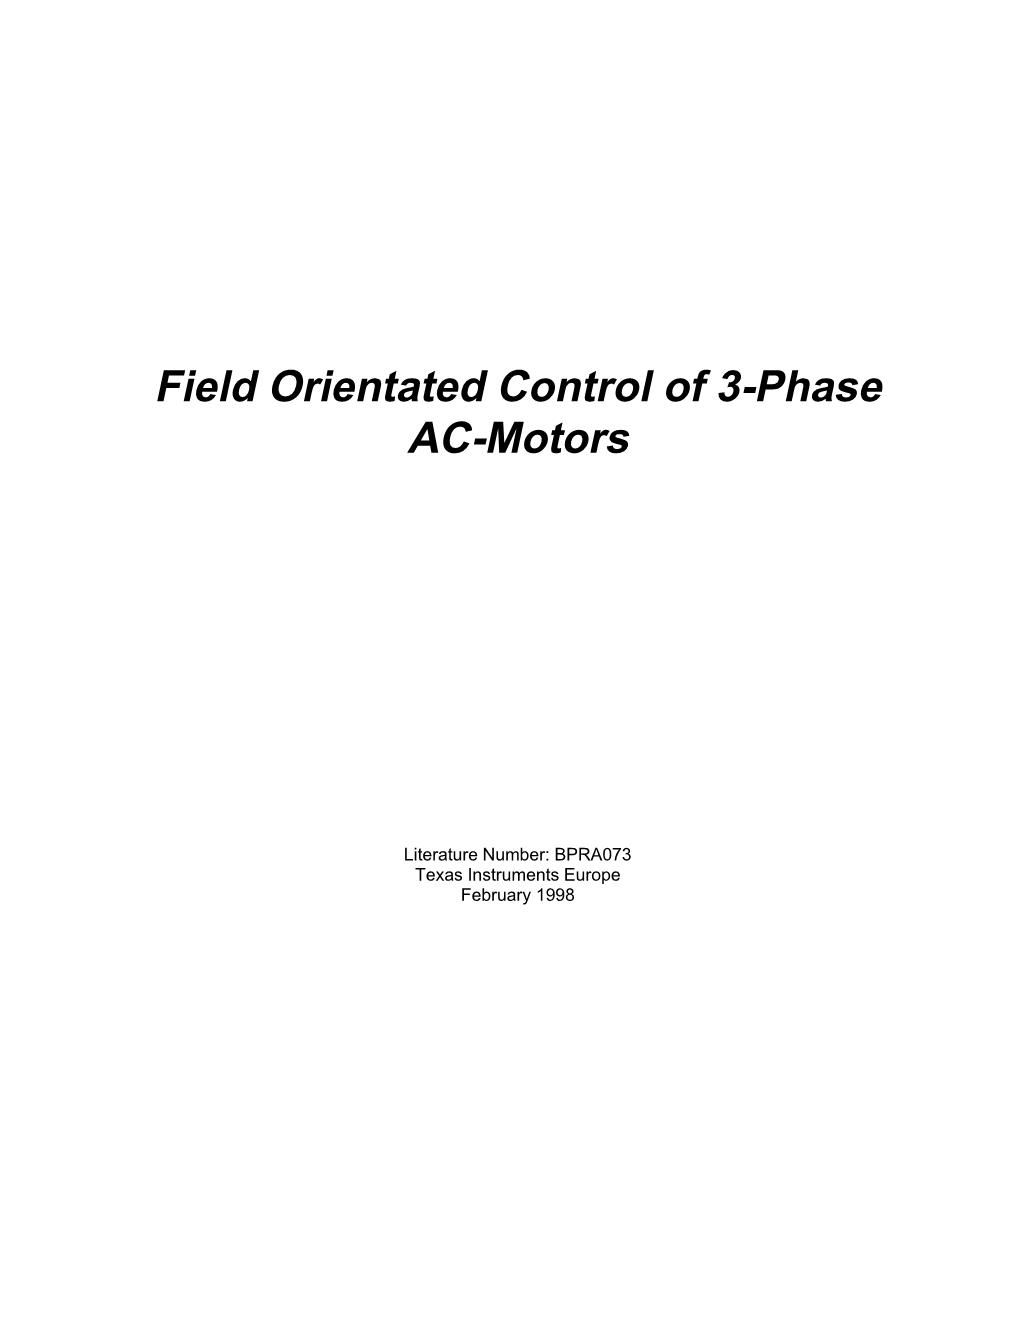 Field Oriented Control 3-Phase Ac-Motors